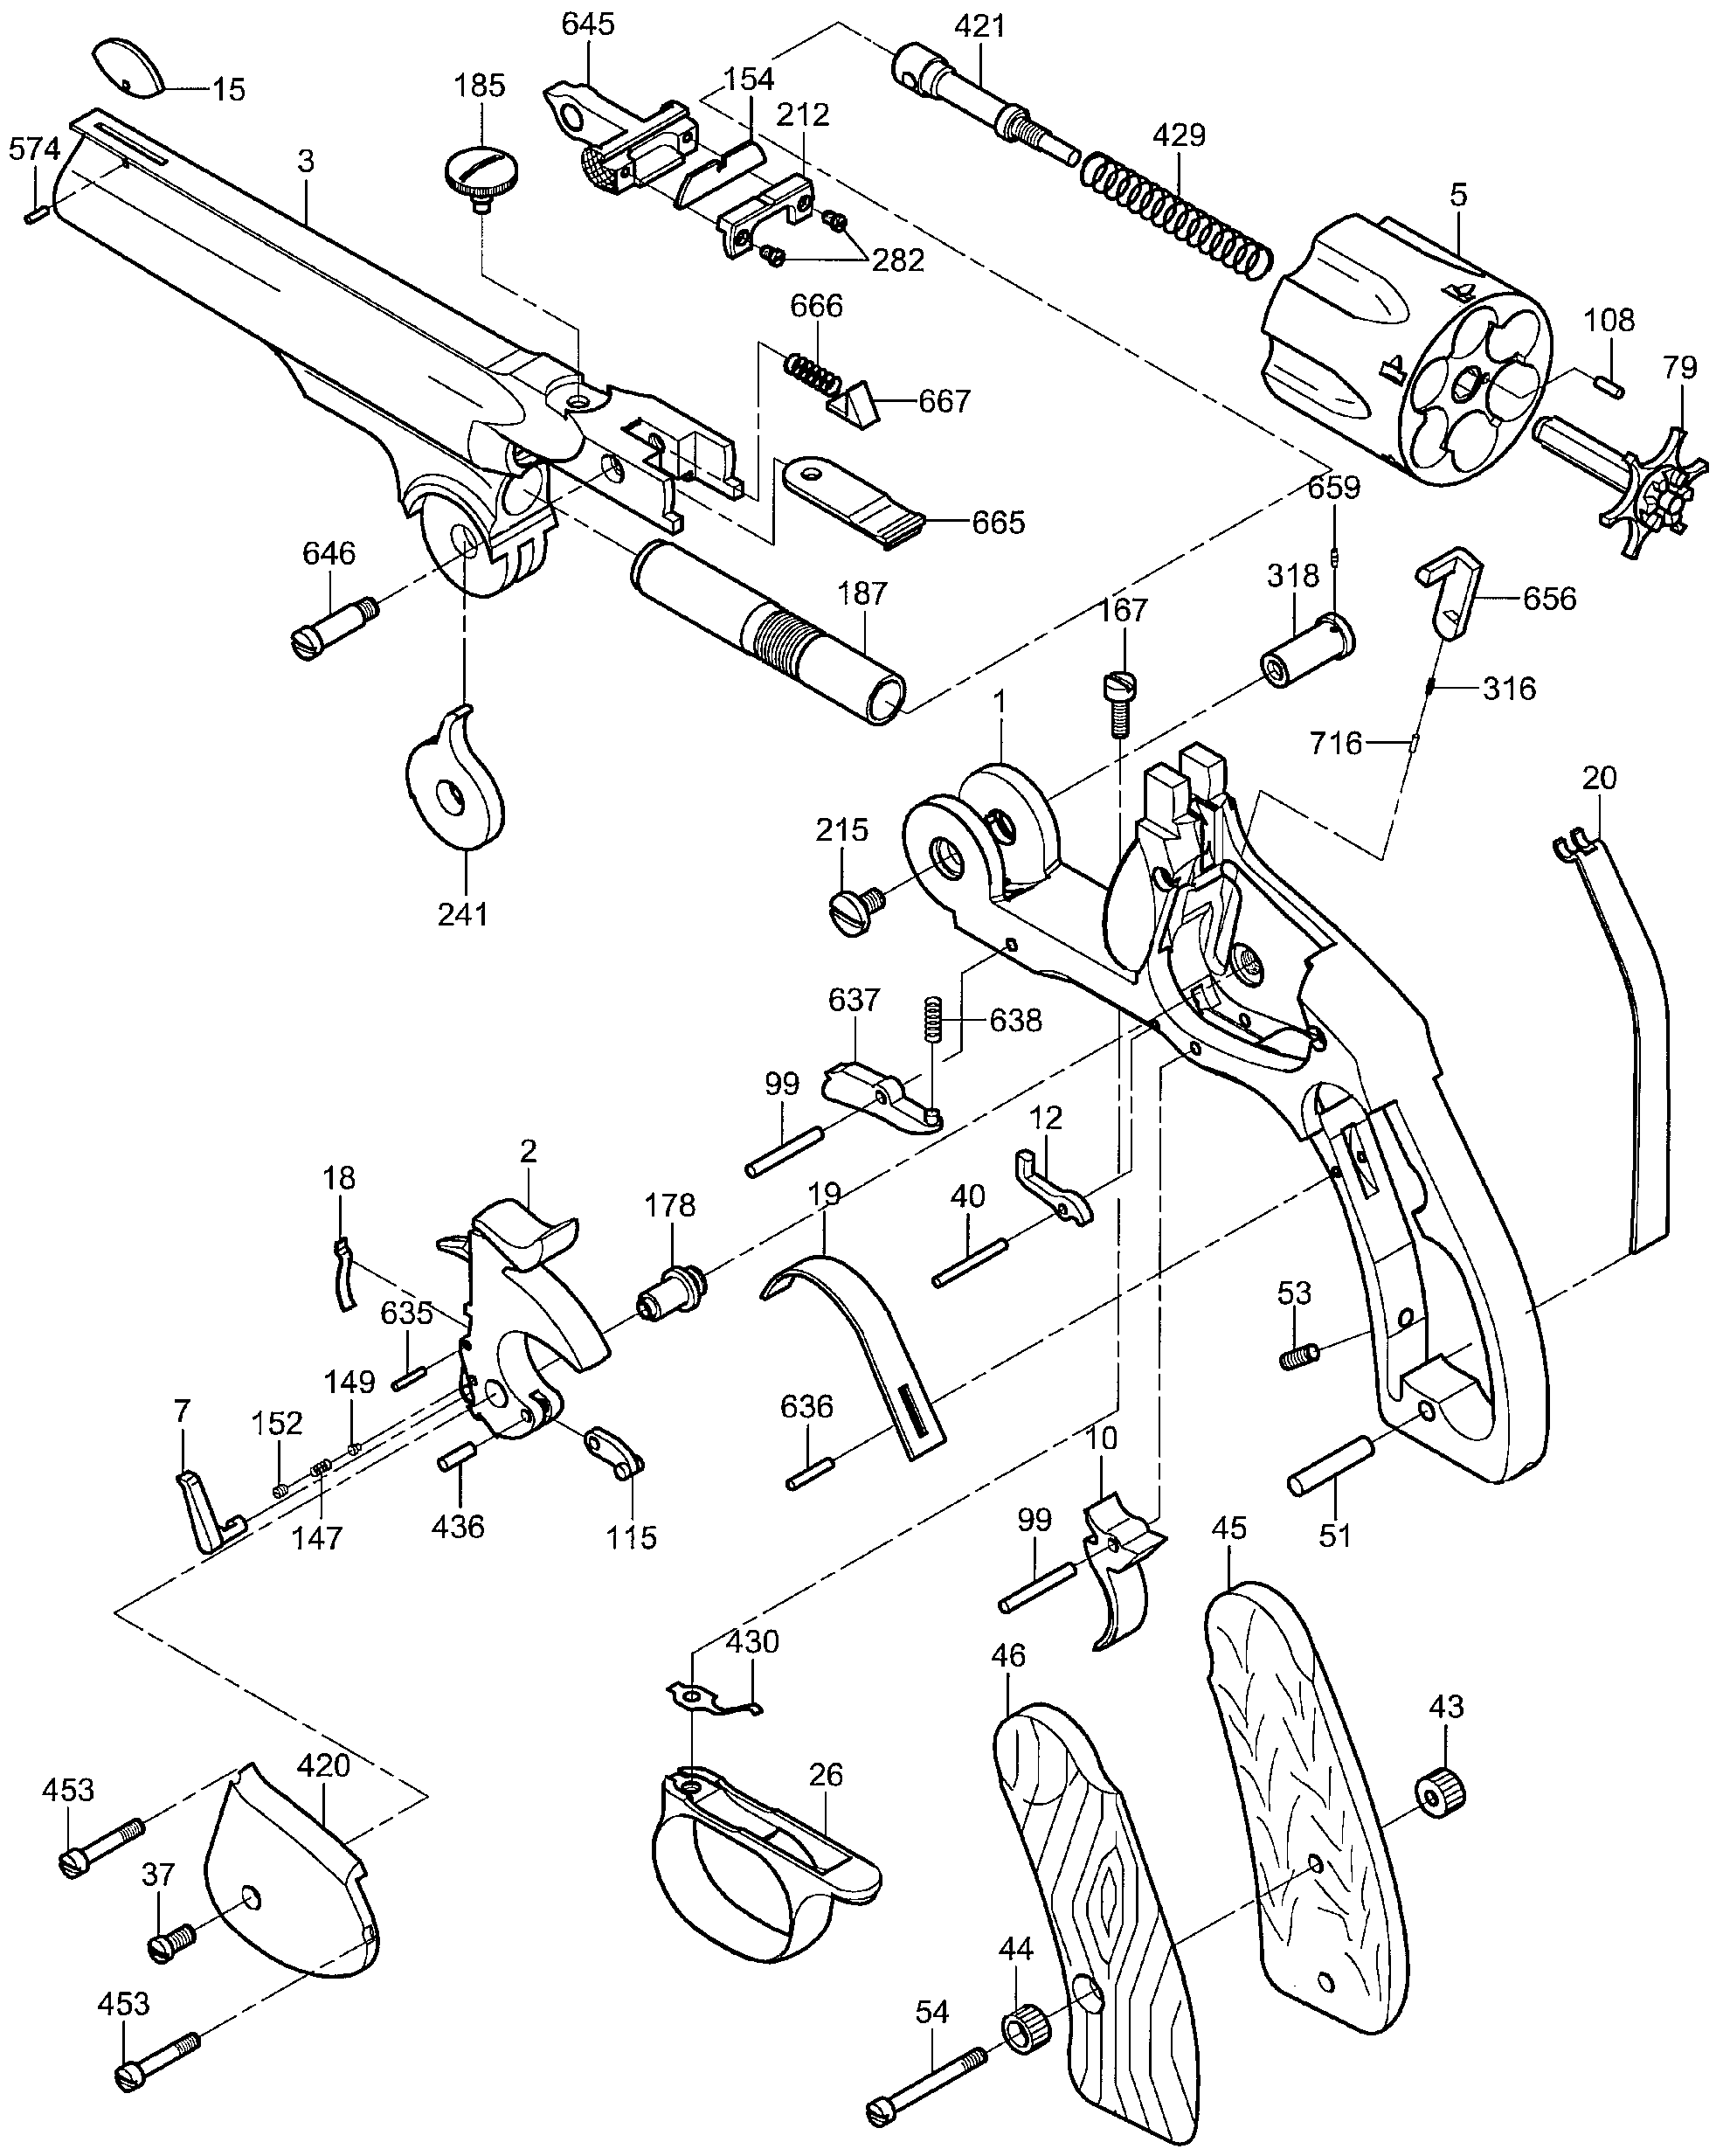 Smith And Wesson Revolver Parts Diagram